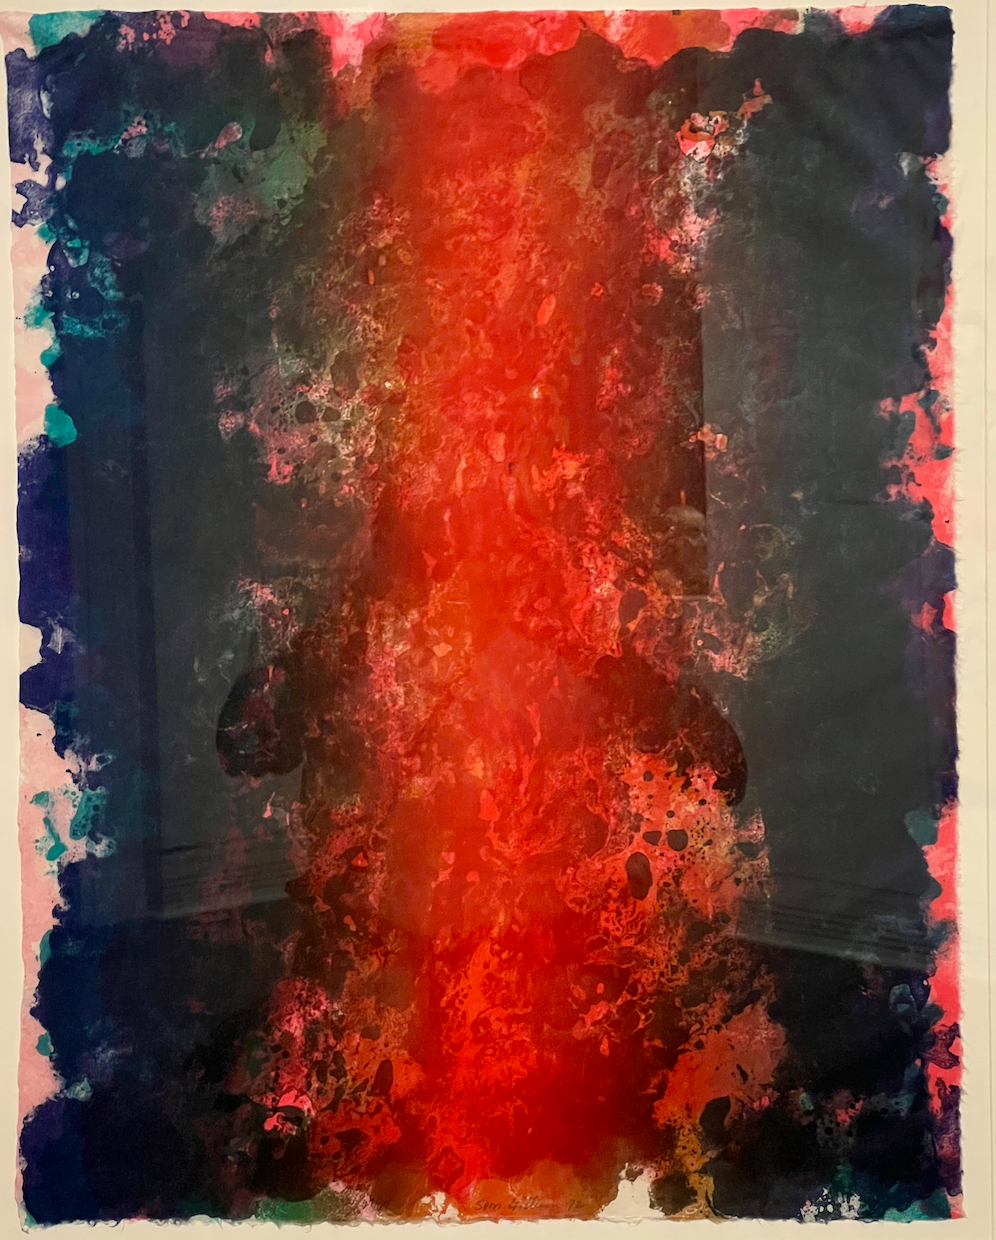 An abstract painting by Sam Gilliam. The painting has various shades of reds and blues. It hangs on a white gallery wall. Candace, who took the picture, is slighty visible in the reflection of the glass frame.